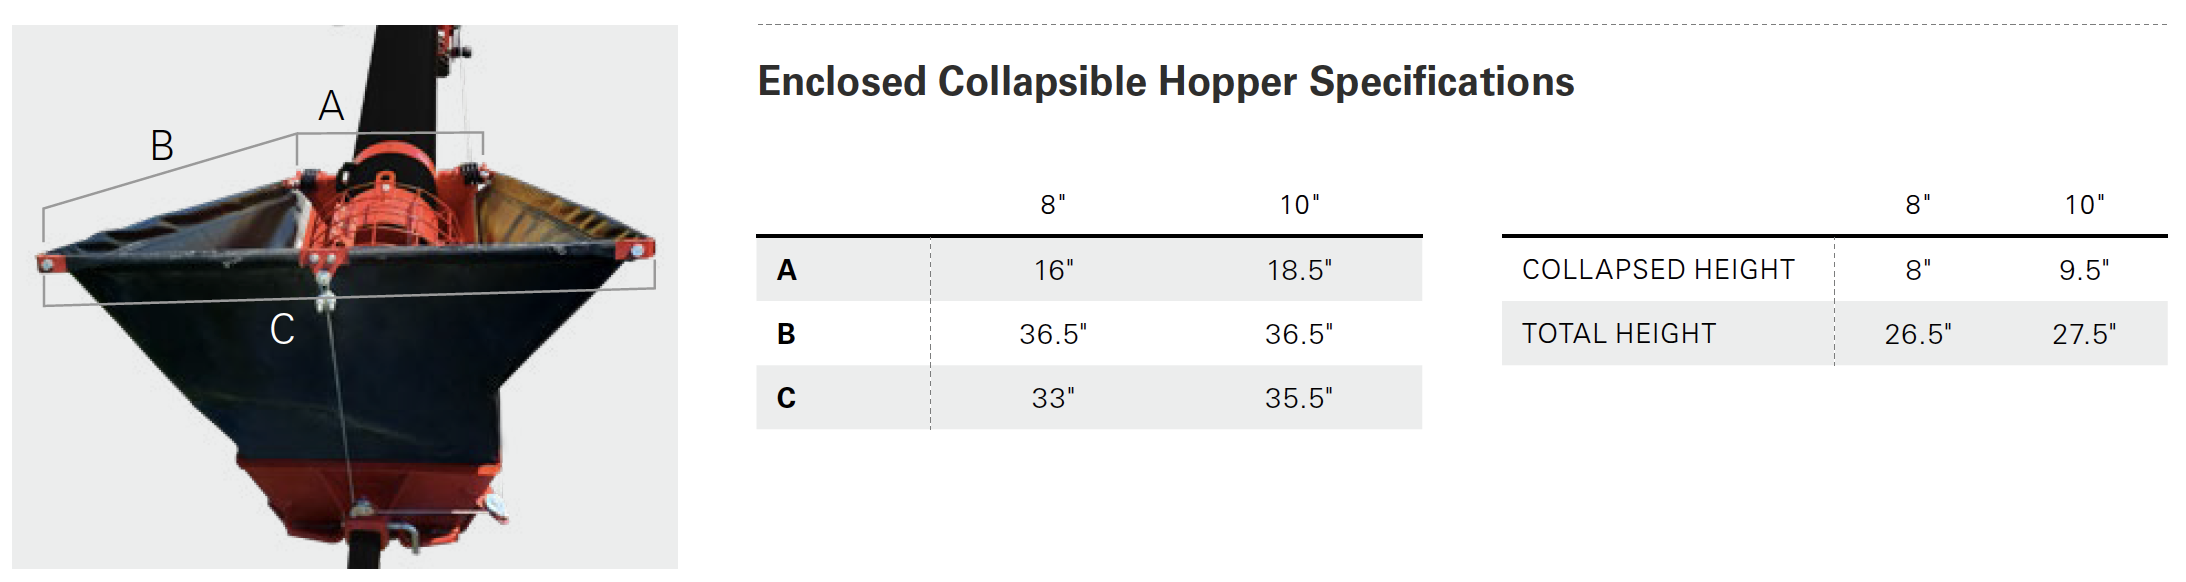 Enclosed Collapsible Hopper Specifications.png